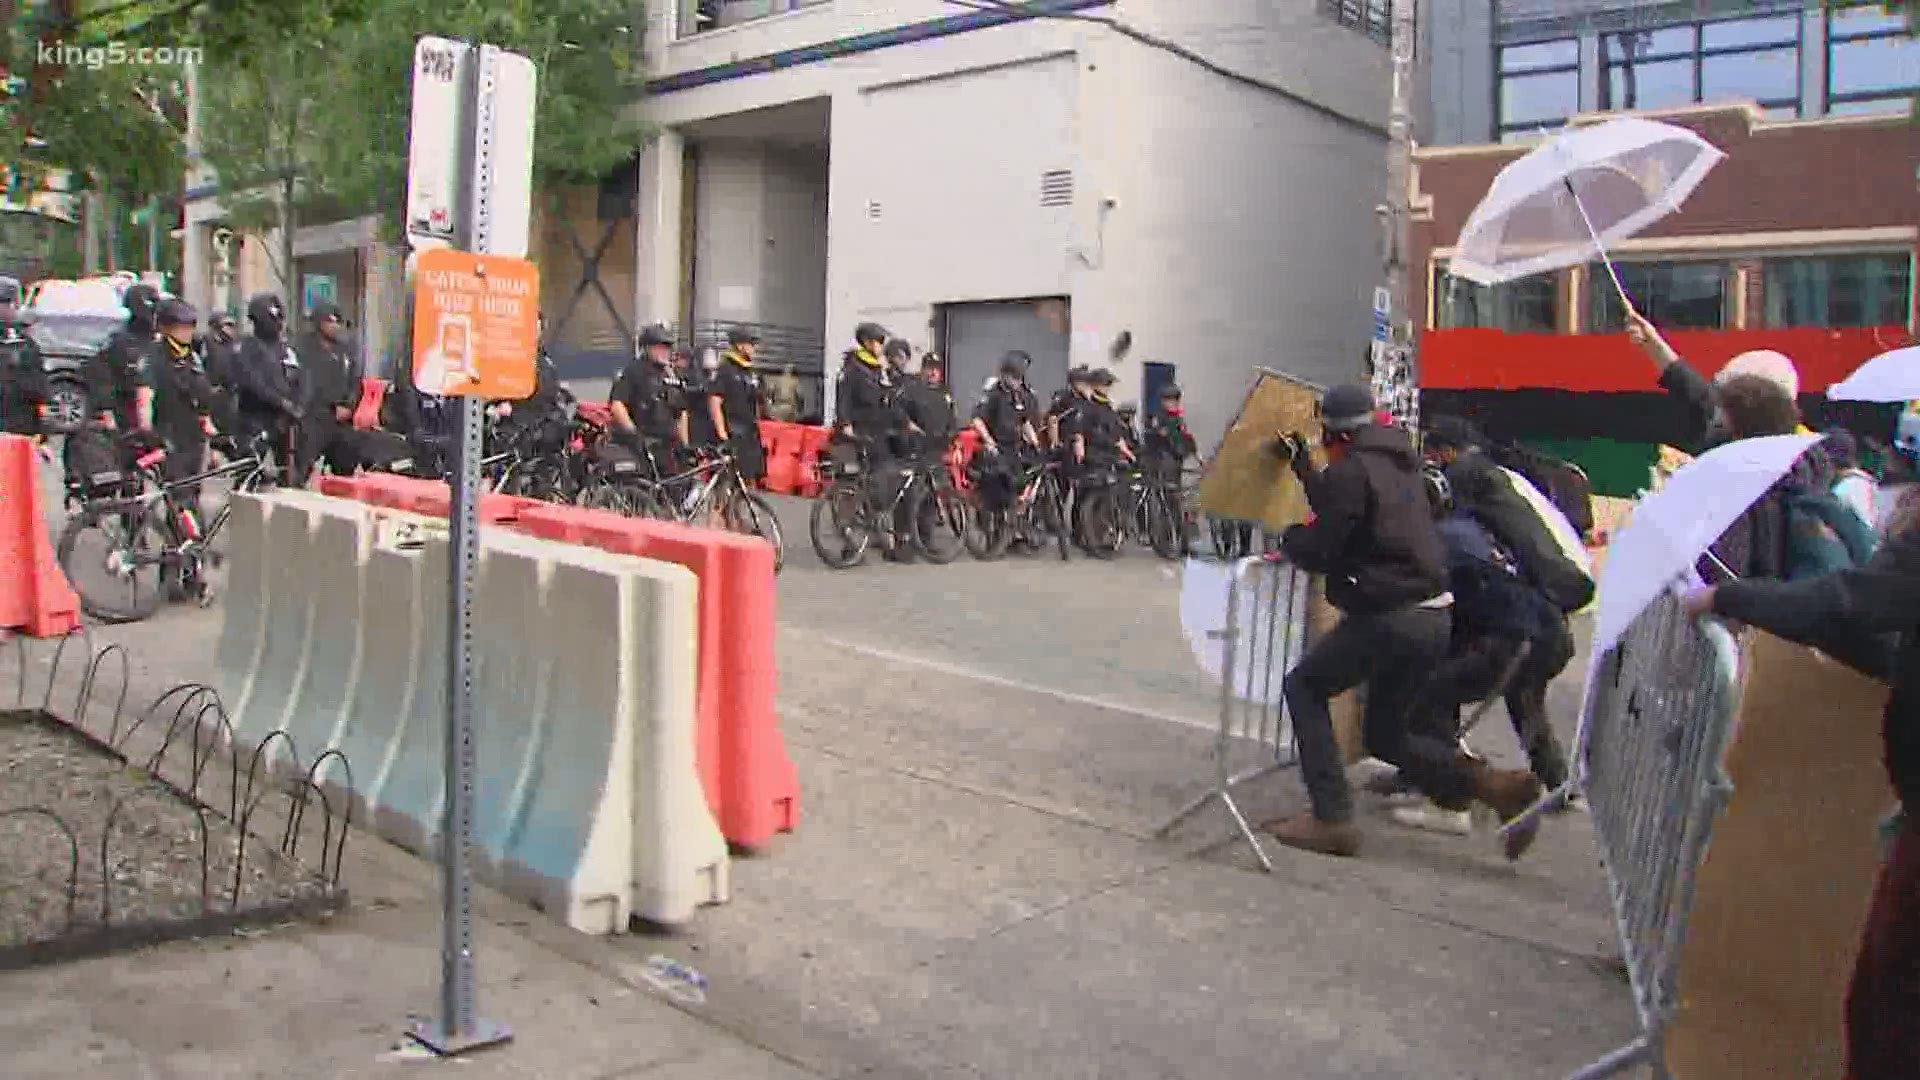 Protesters in Seattle's Capitol Hill neighborhood moved a barricade to get closer to Seattle police's East Precinct. SPD is decreasing presence at protests.